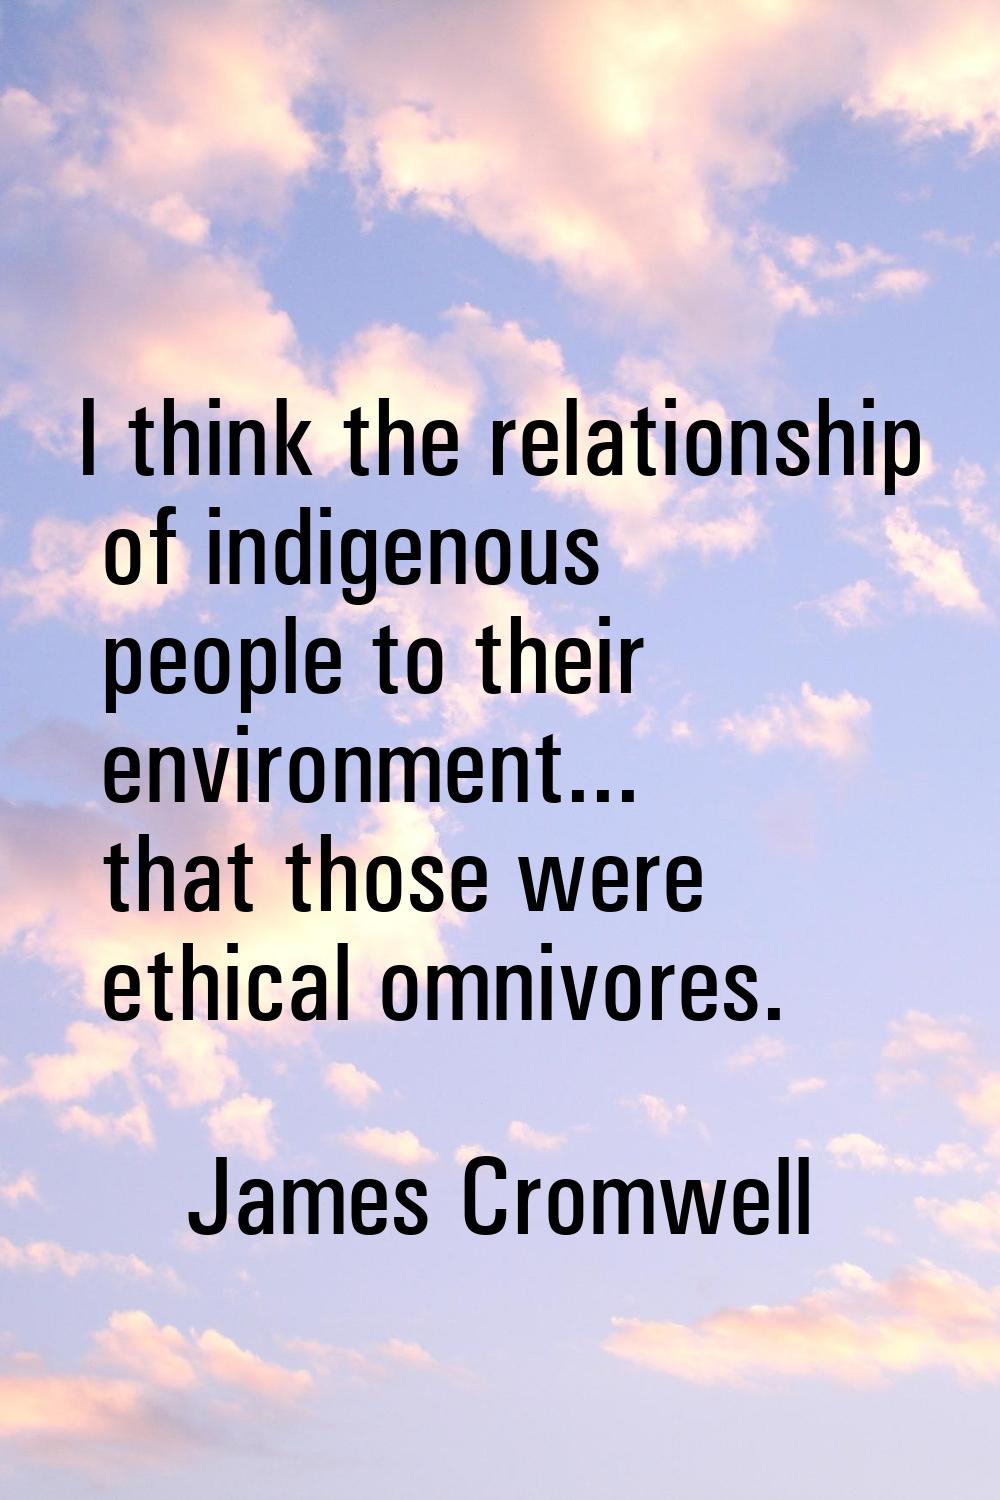 I think the relationship of indigenous people to their environment... that those were ethical omniv